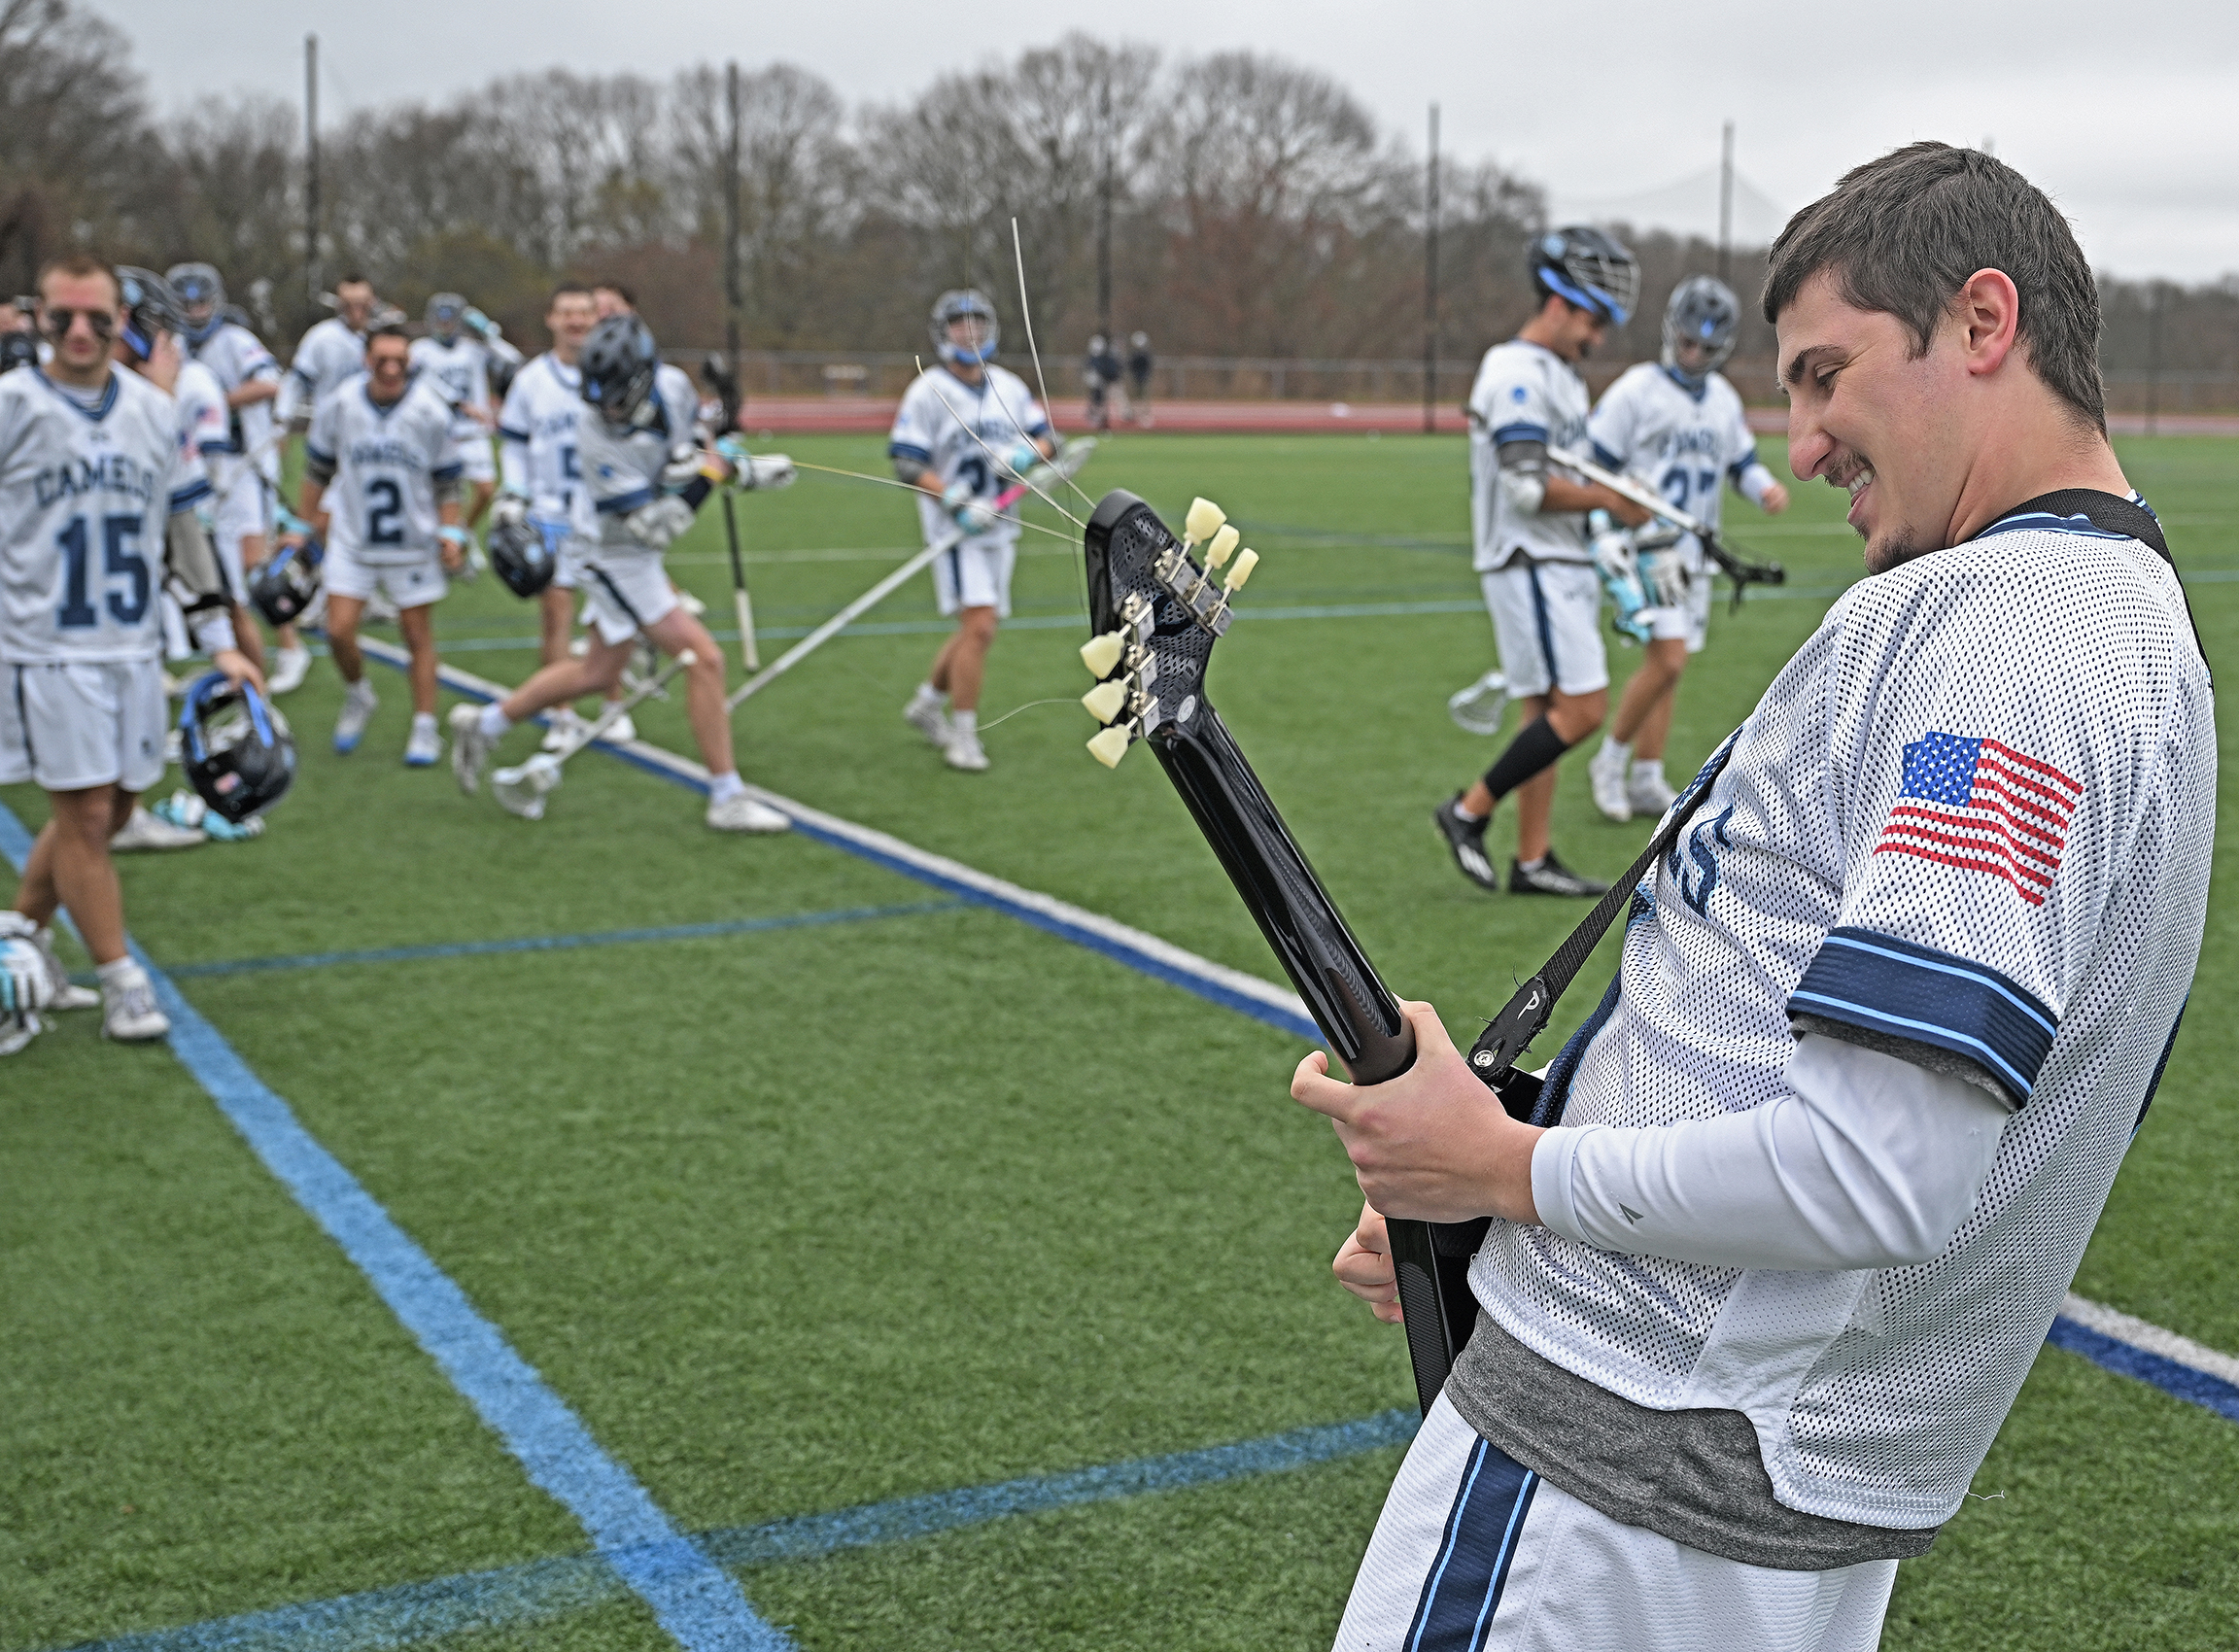 A lacrosse player performs the national anthem on an electric guitar before a game